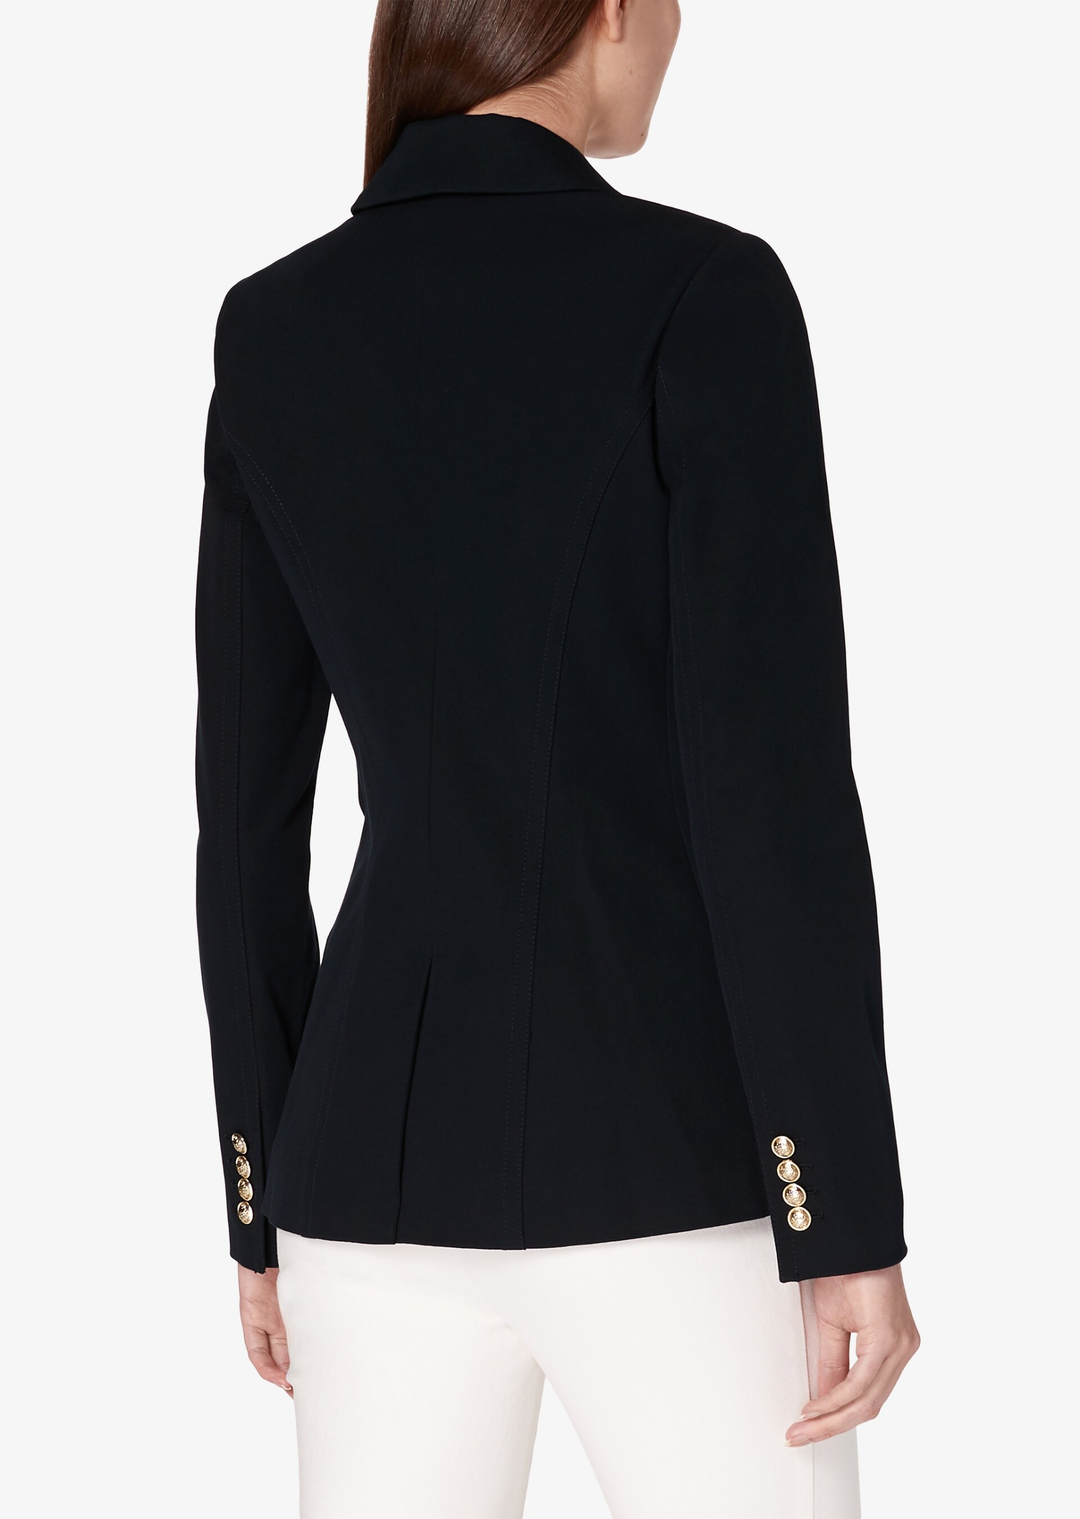 Derek Lam 10 Crosby - Rodeo Double Breasted Blazer w/ Sailor Buttons in Black